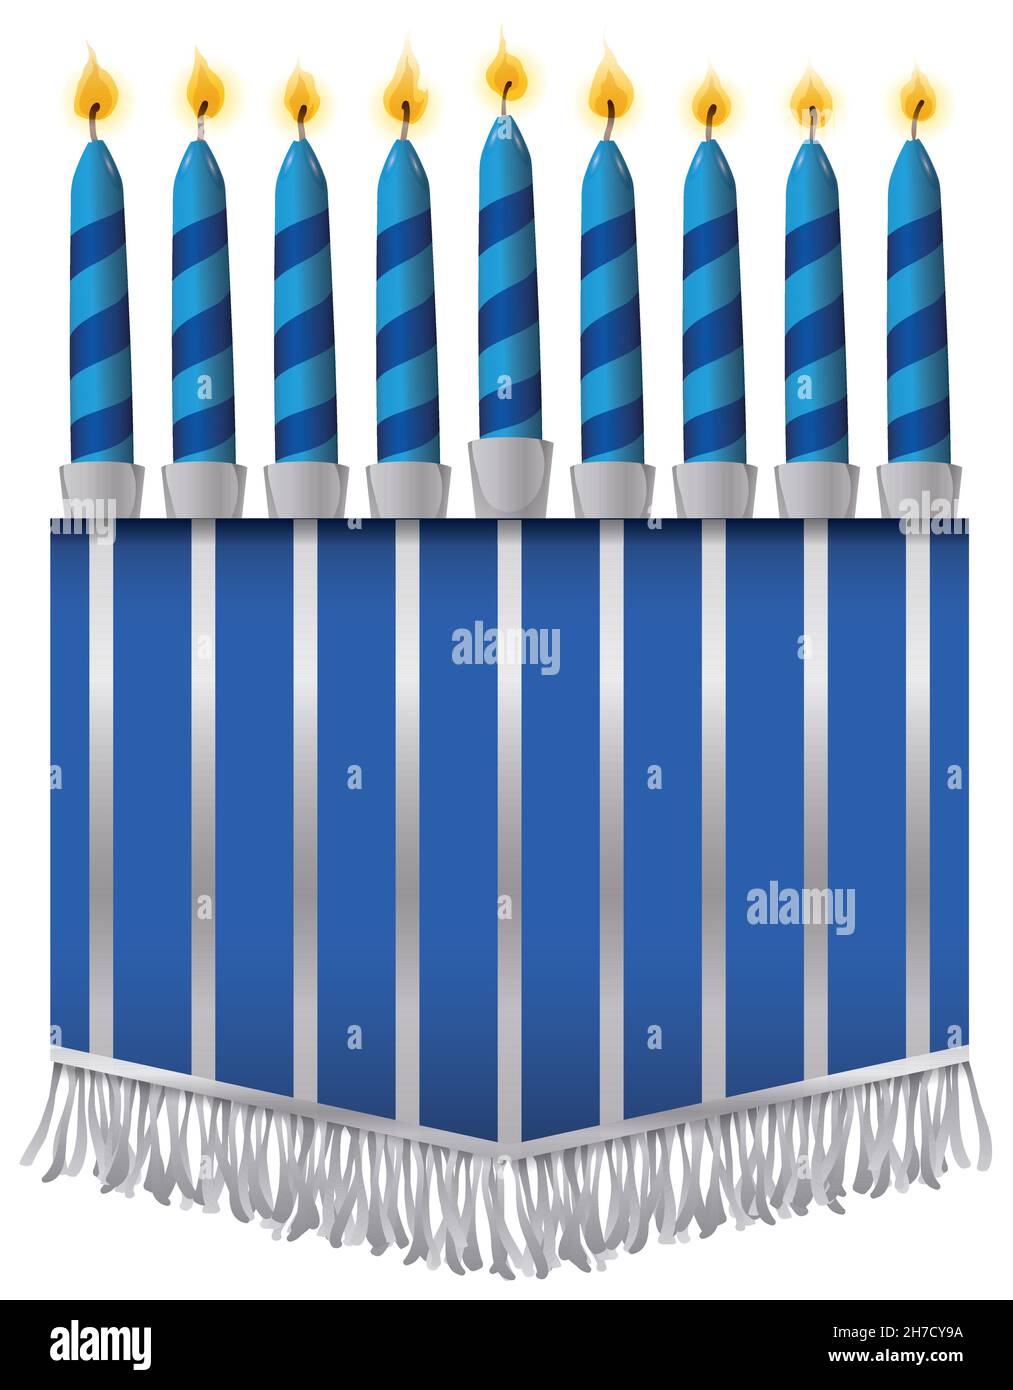 Blue, lighted and striped candles like a hanukkiah over pennant decorated with fringes over white background. Stock Vector